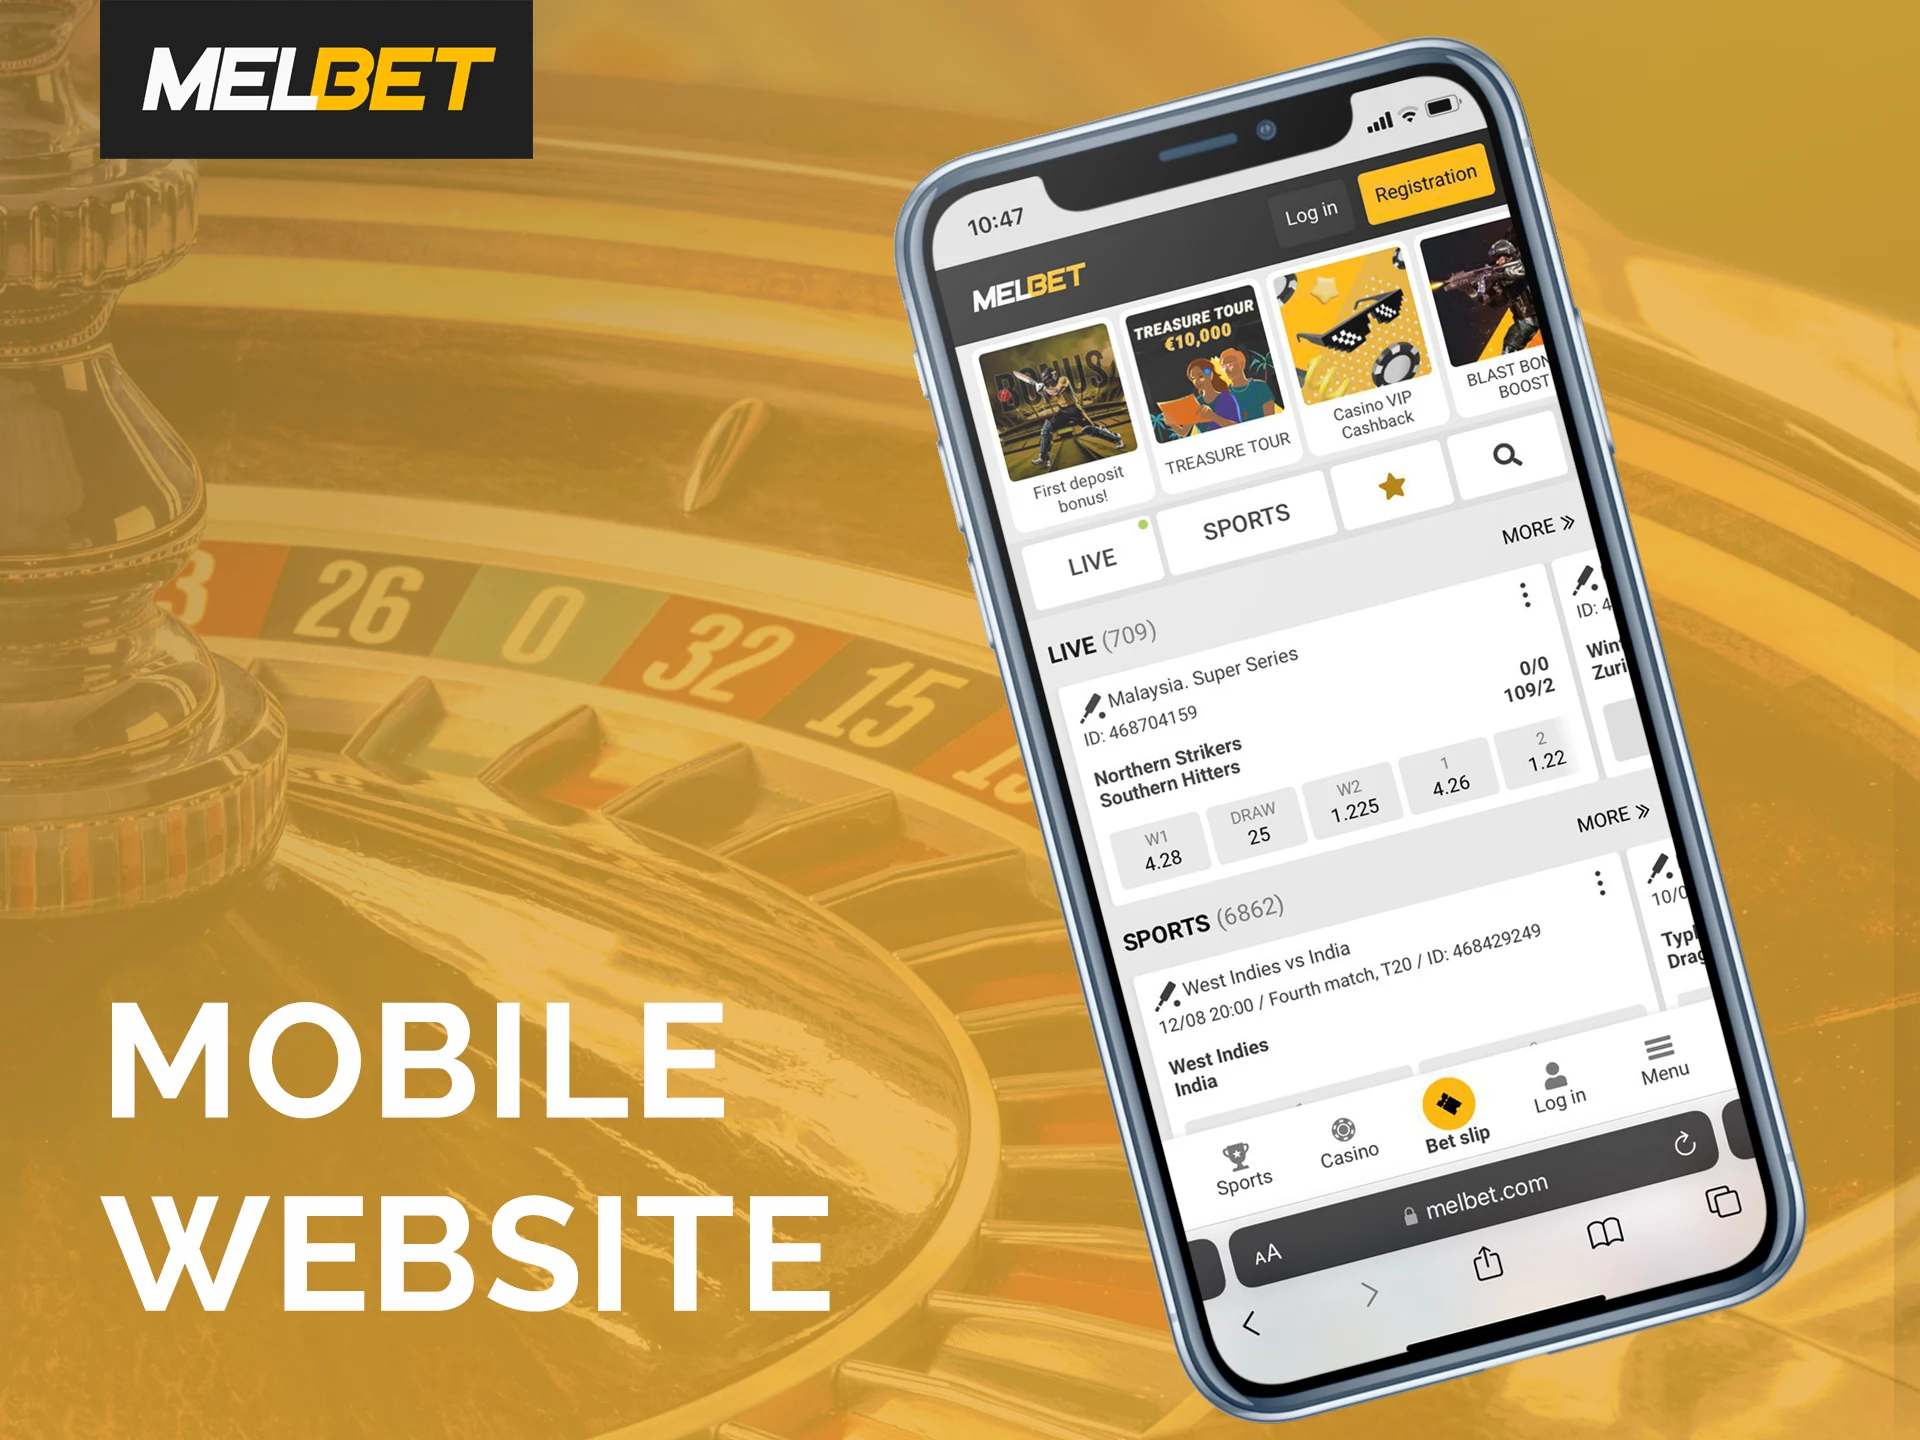 Access the mobile version of the site using your mobile device.